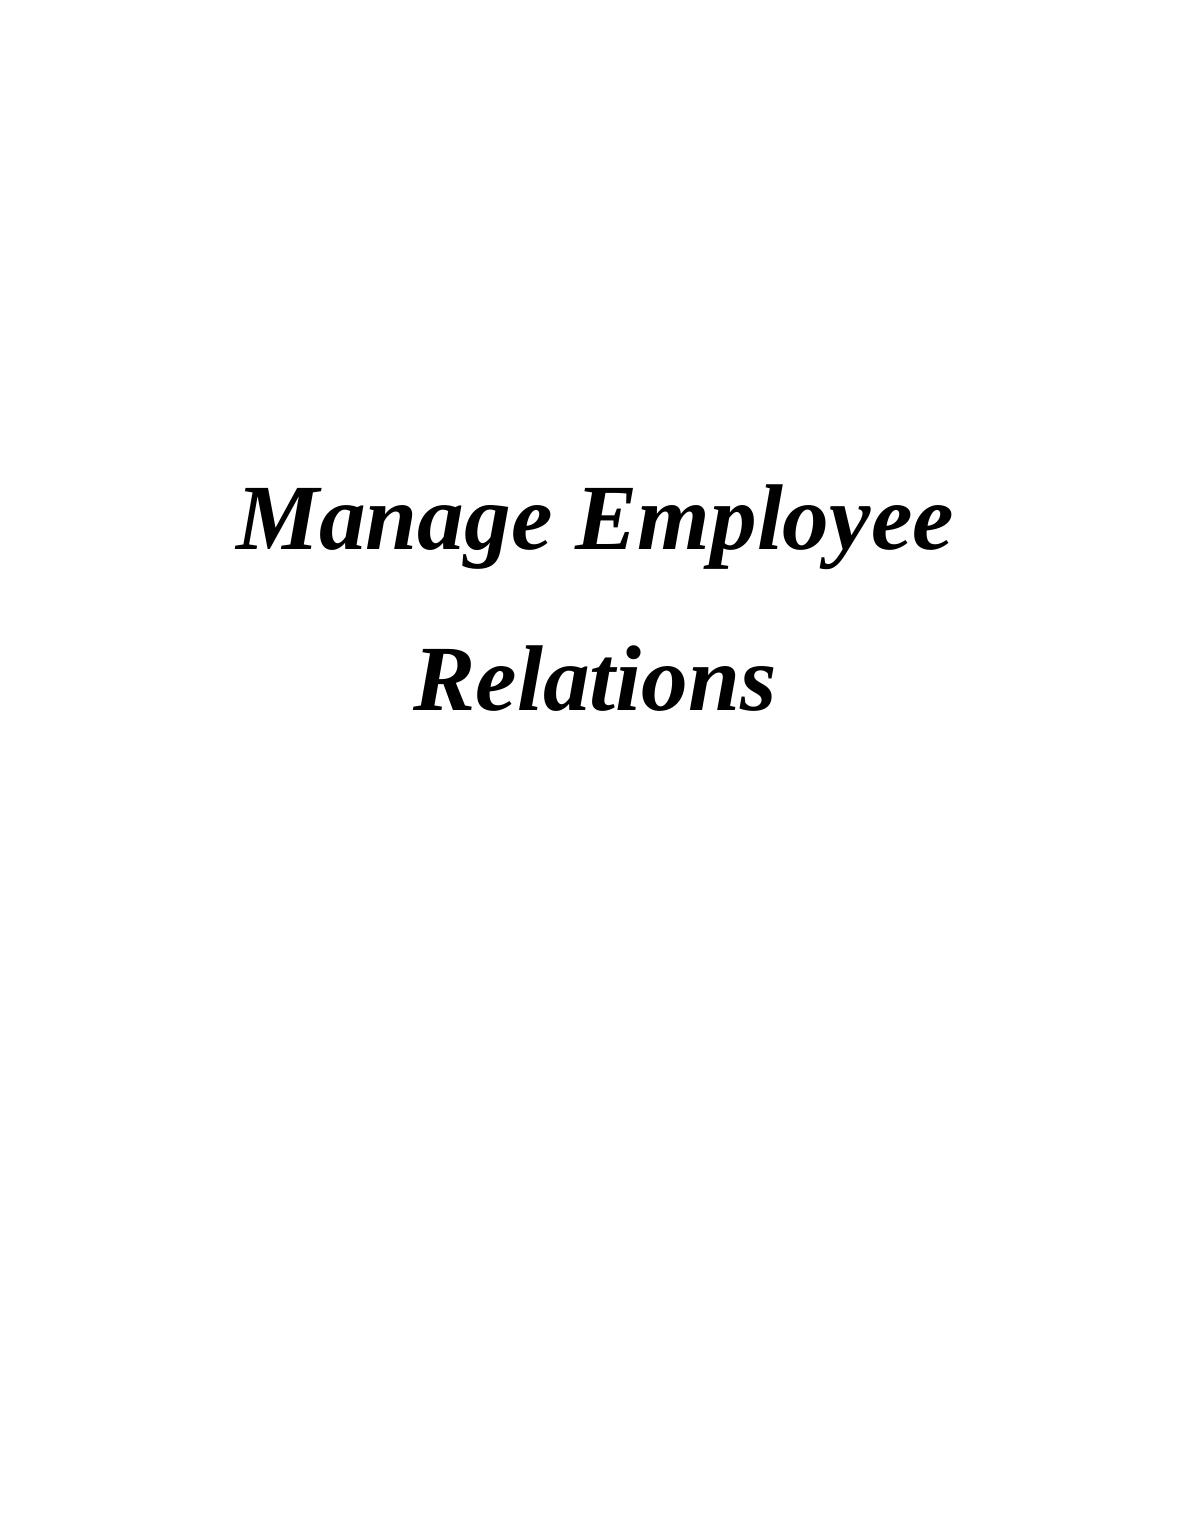 Managing Employee Relations: Strategies and Implementation Plan_1